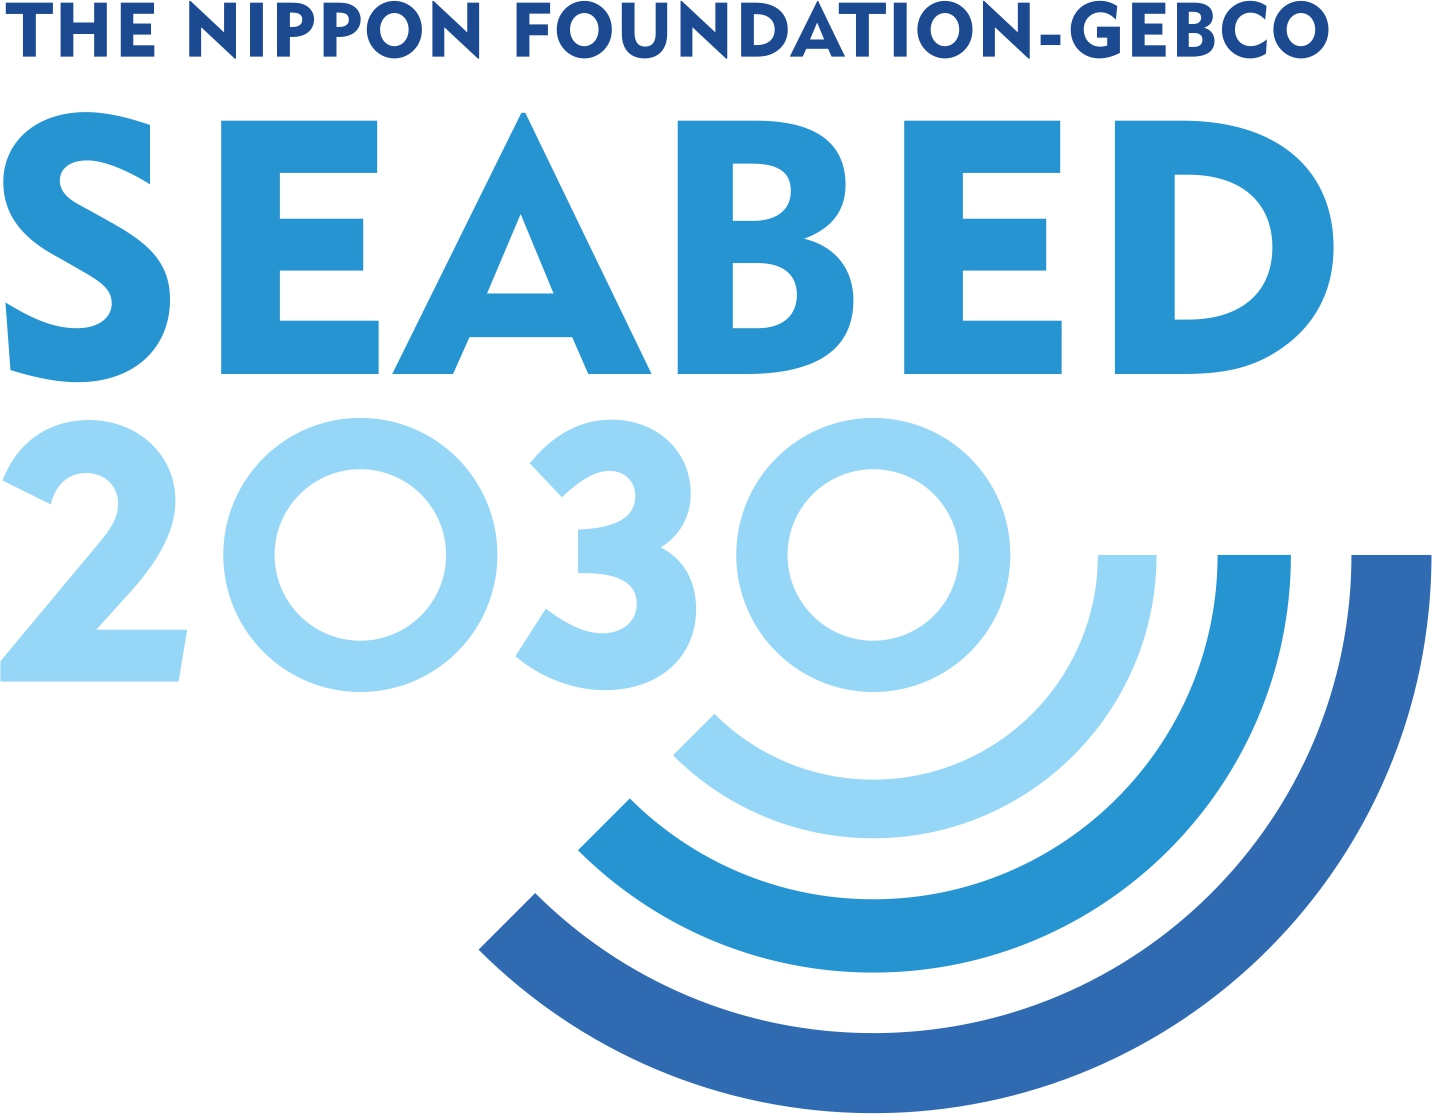 The Nippon Foundation-GEBCO Seabed 2030 logo 